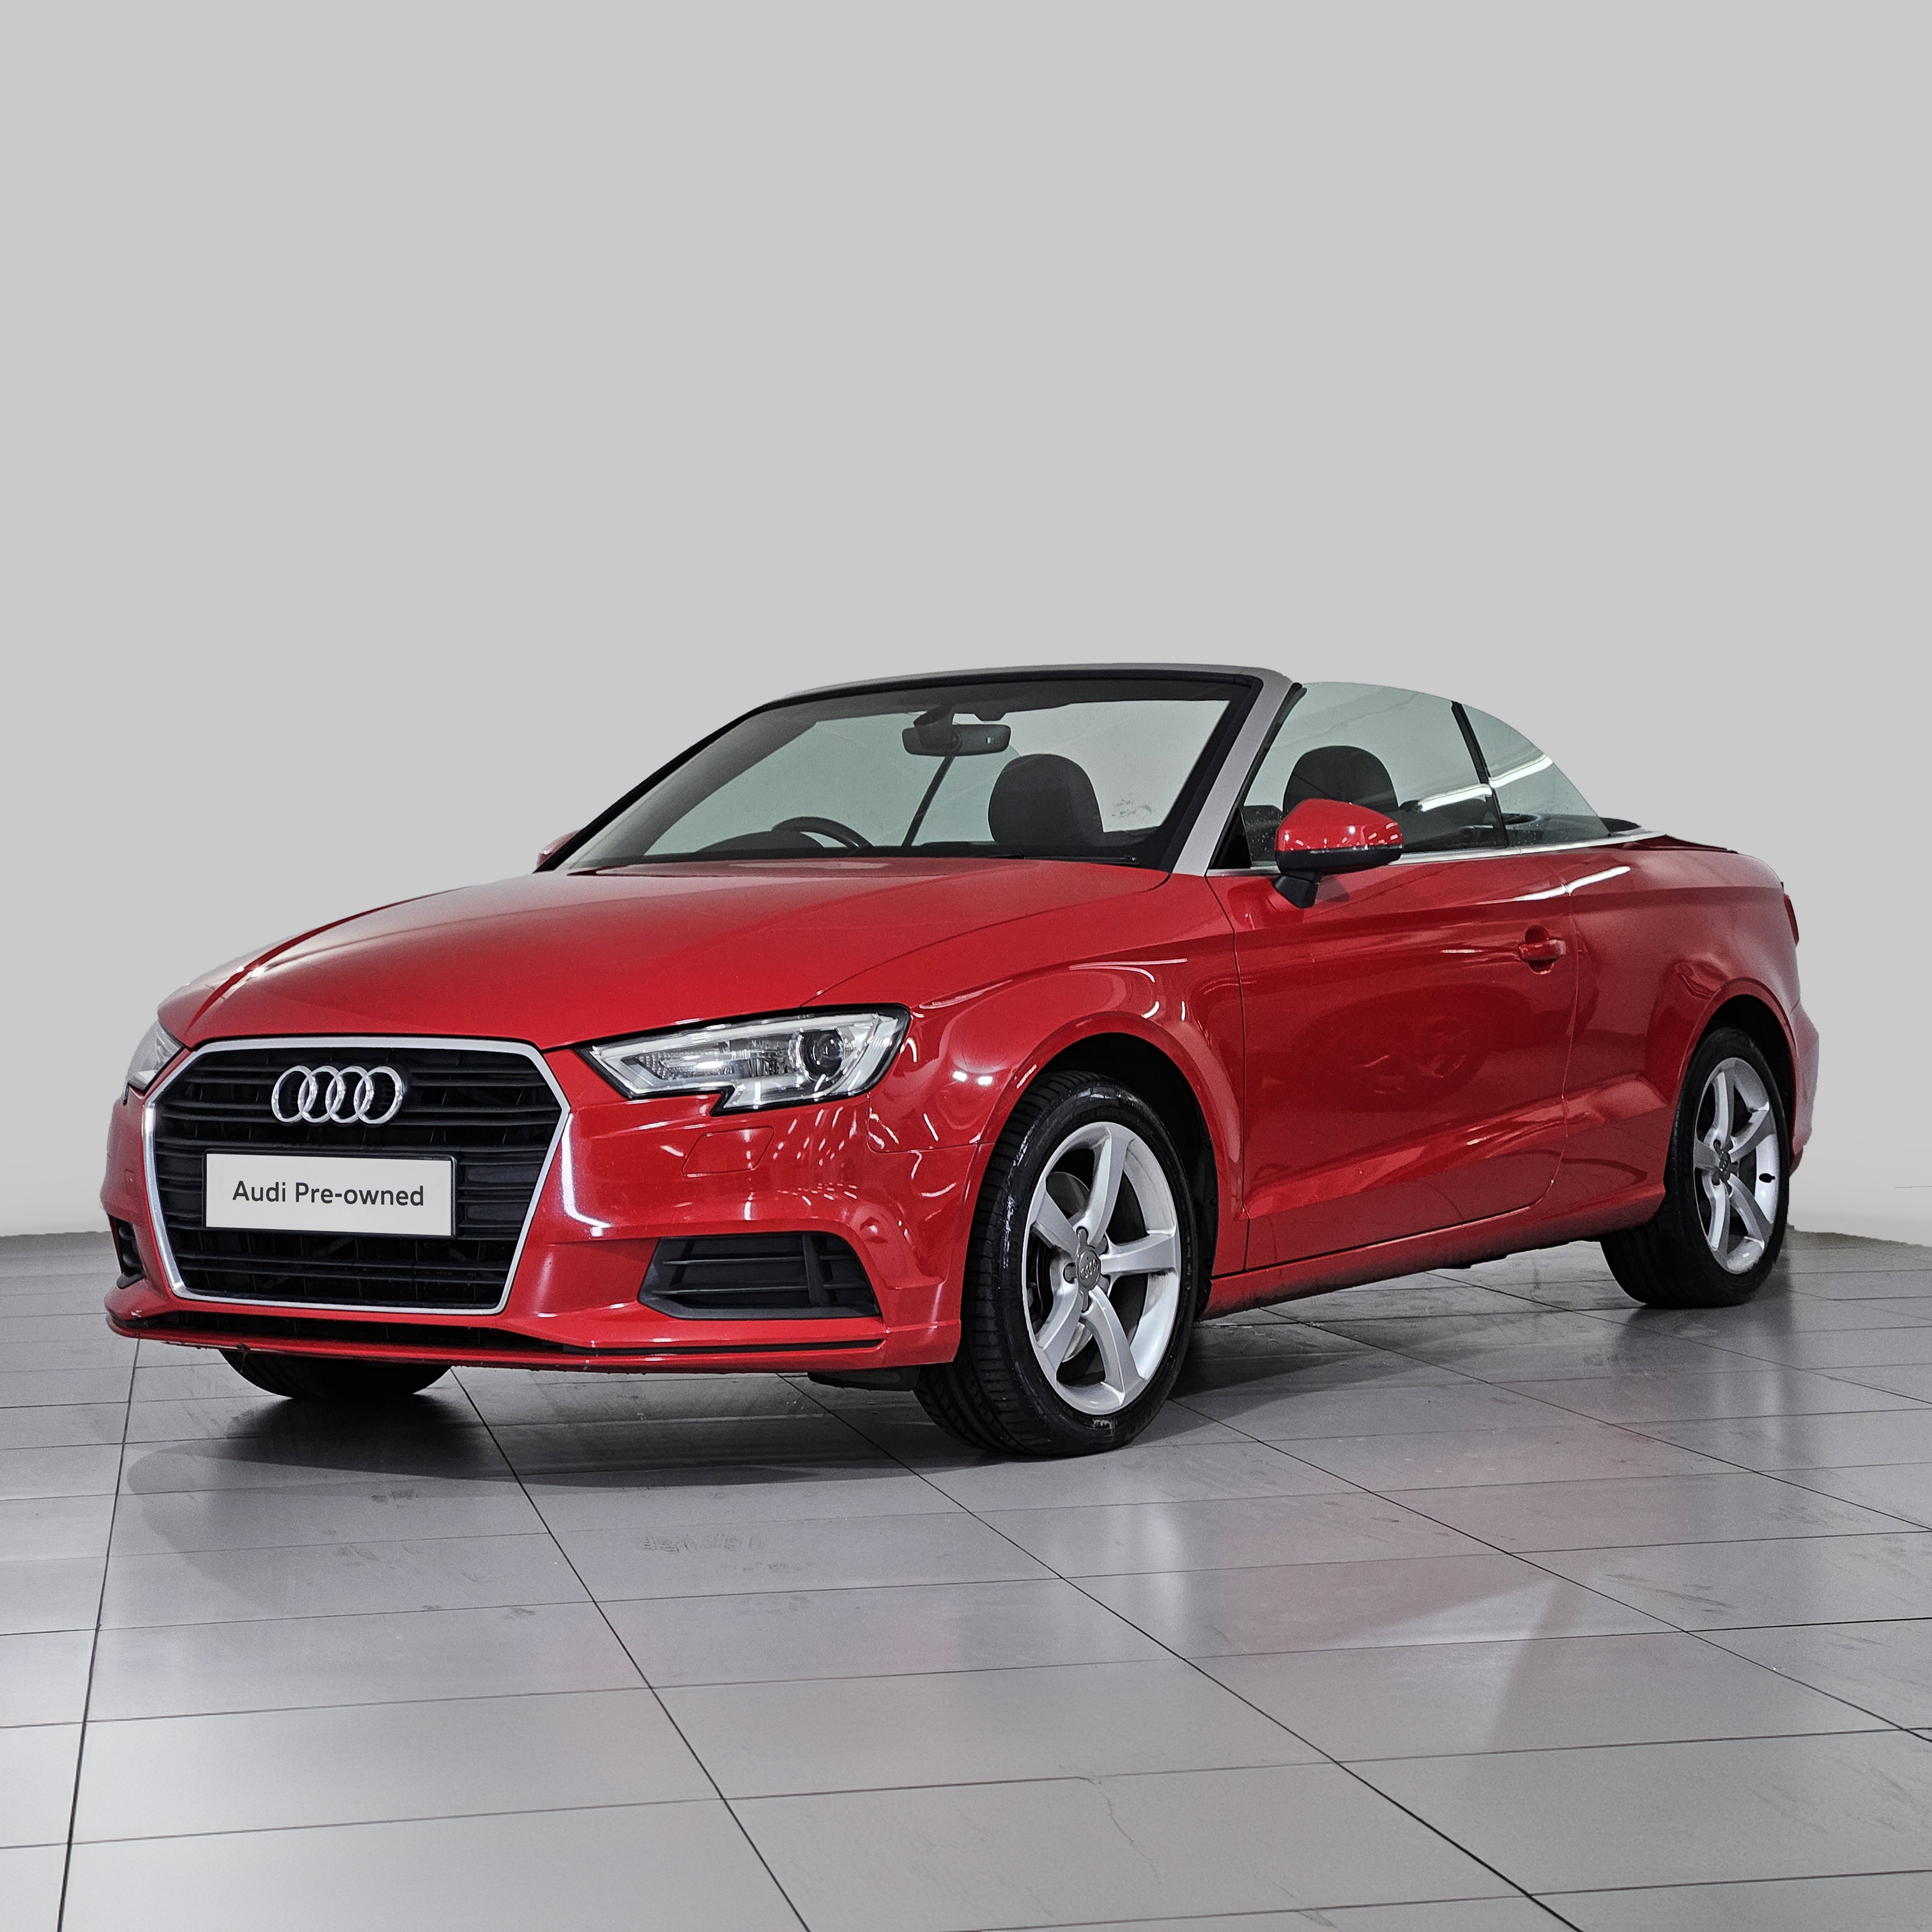 2019 Audi A3  for sale - 178453/